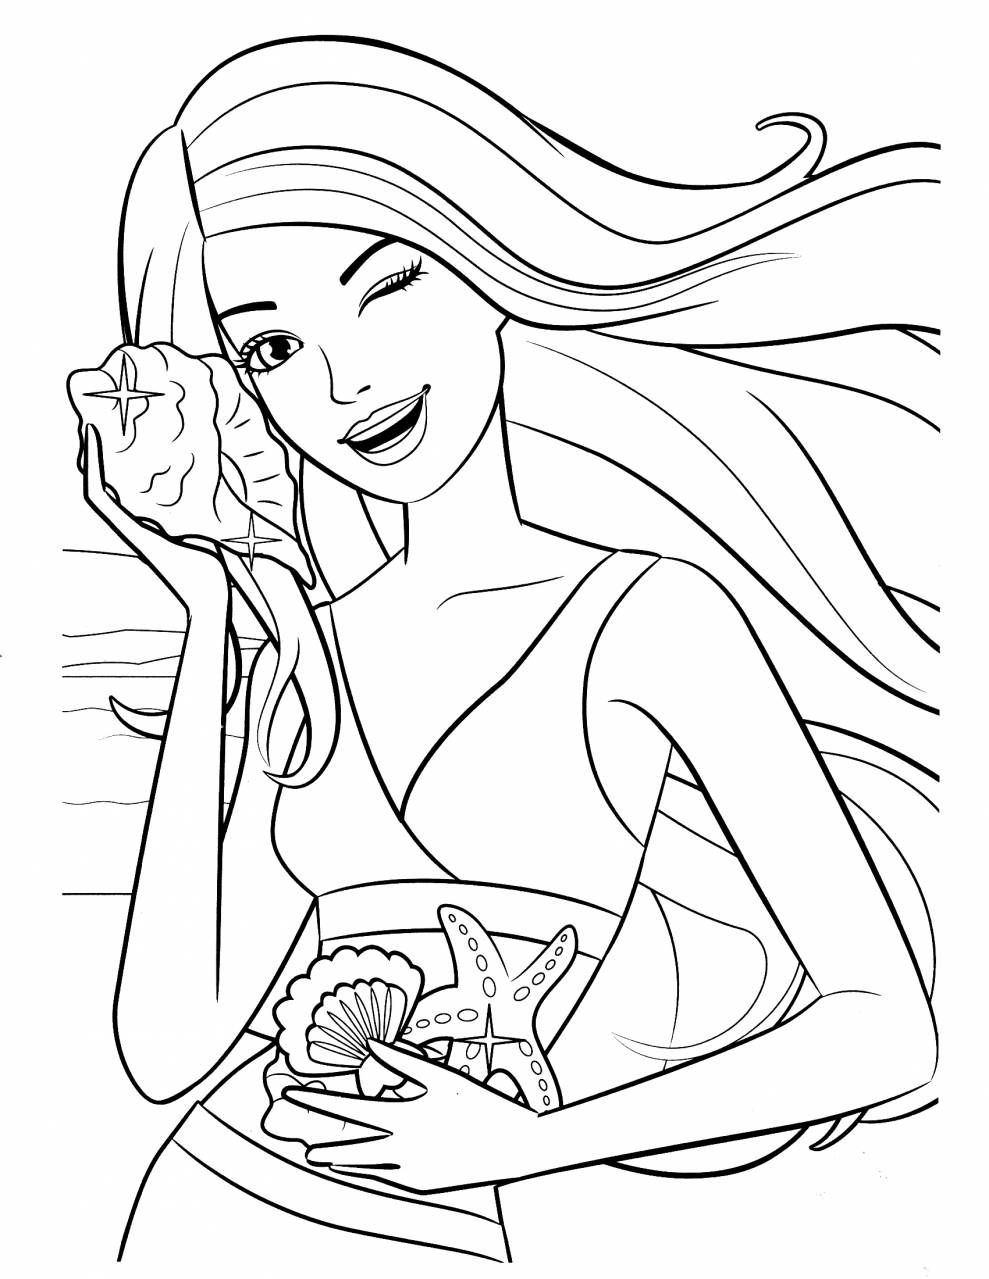 Barbie doll coloring pages – Free coloring pages